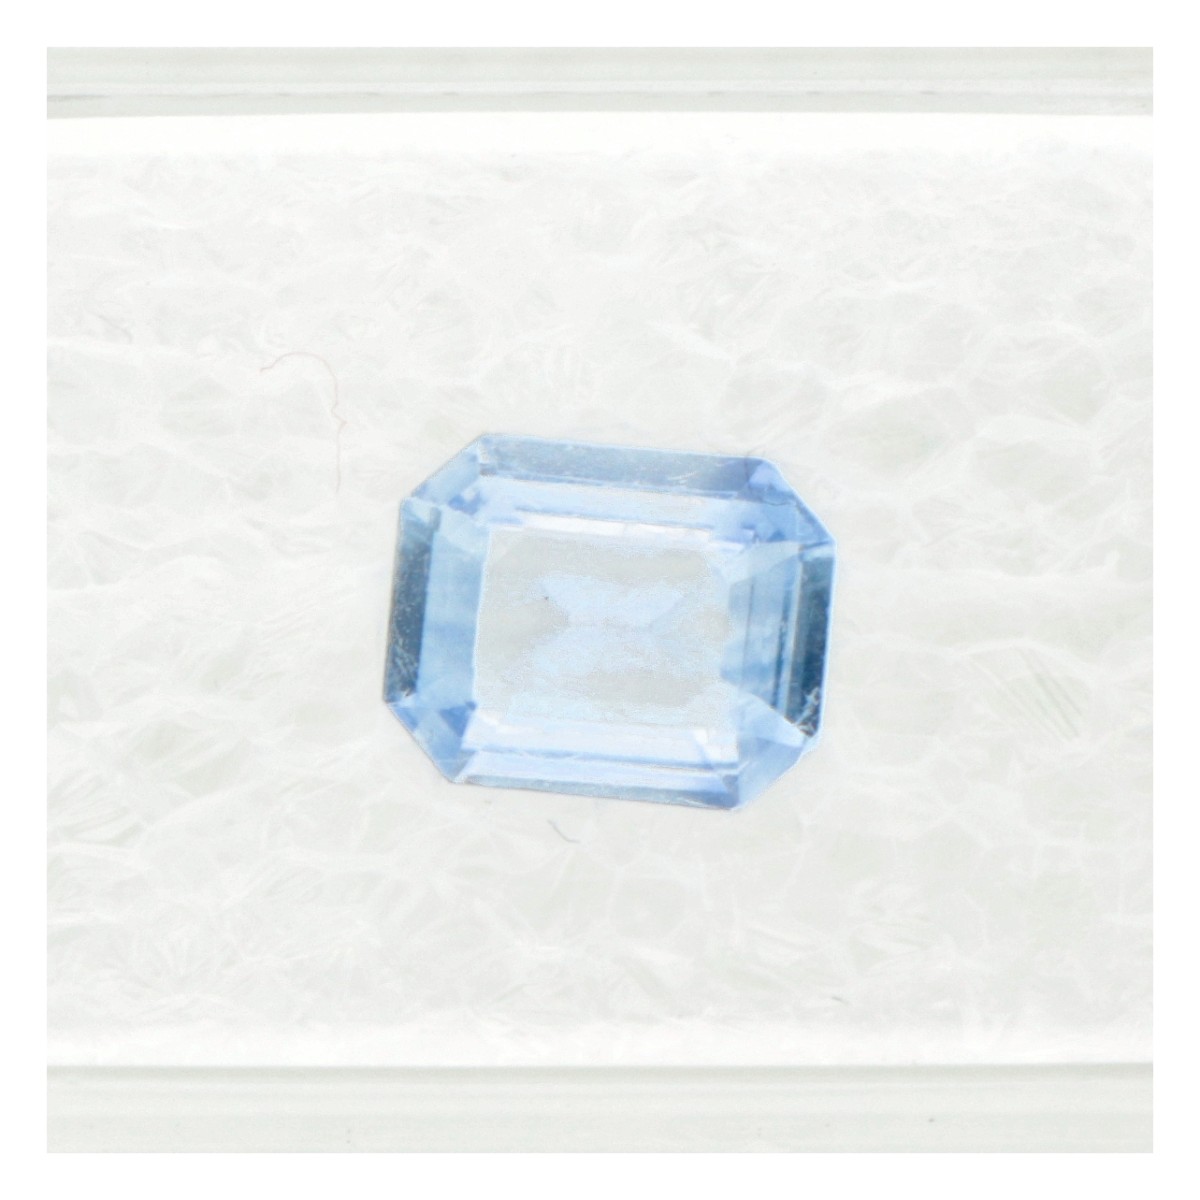 Gem Report Antwerp certified natural sapphire of 1.18 ct. - Image 2 of 4